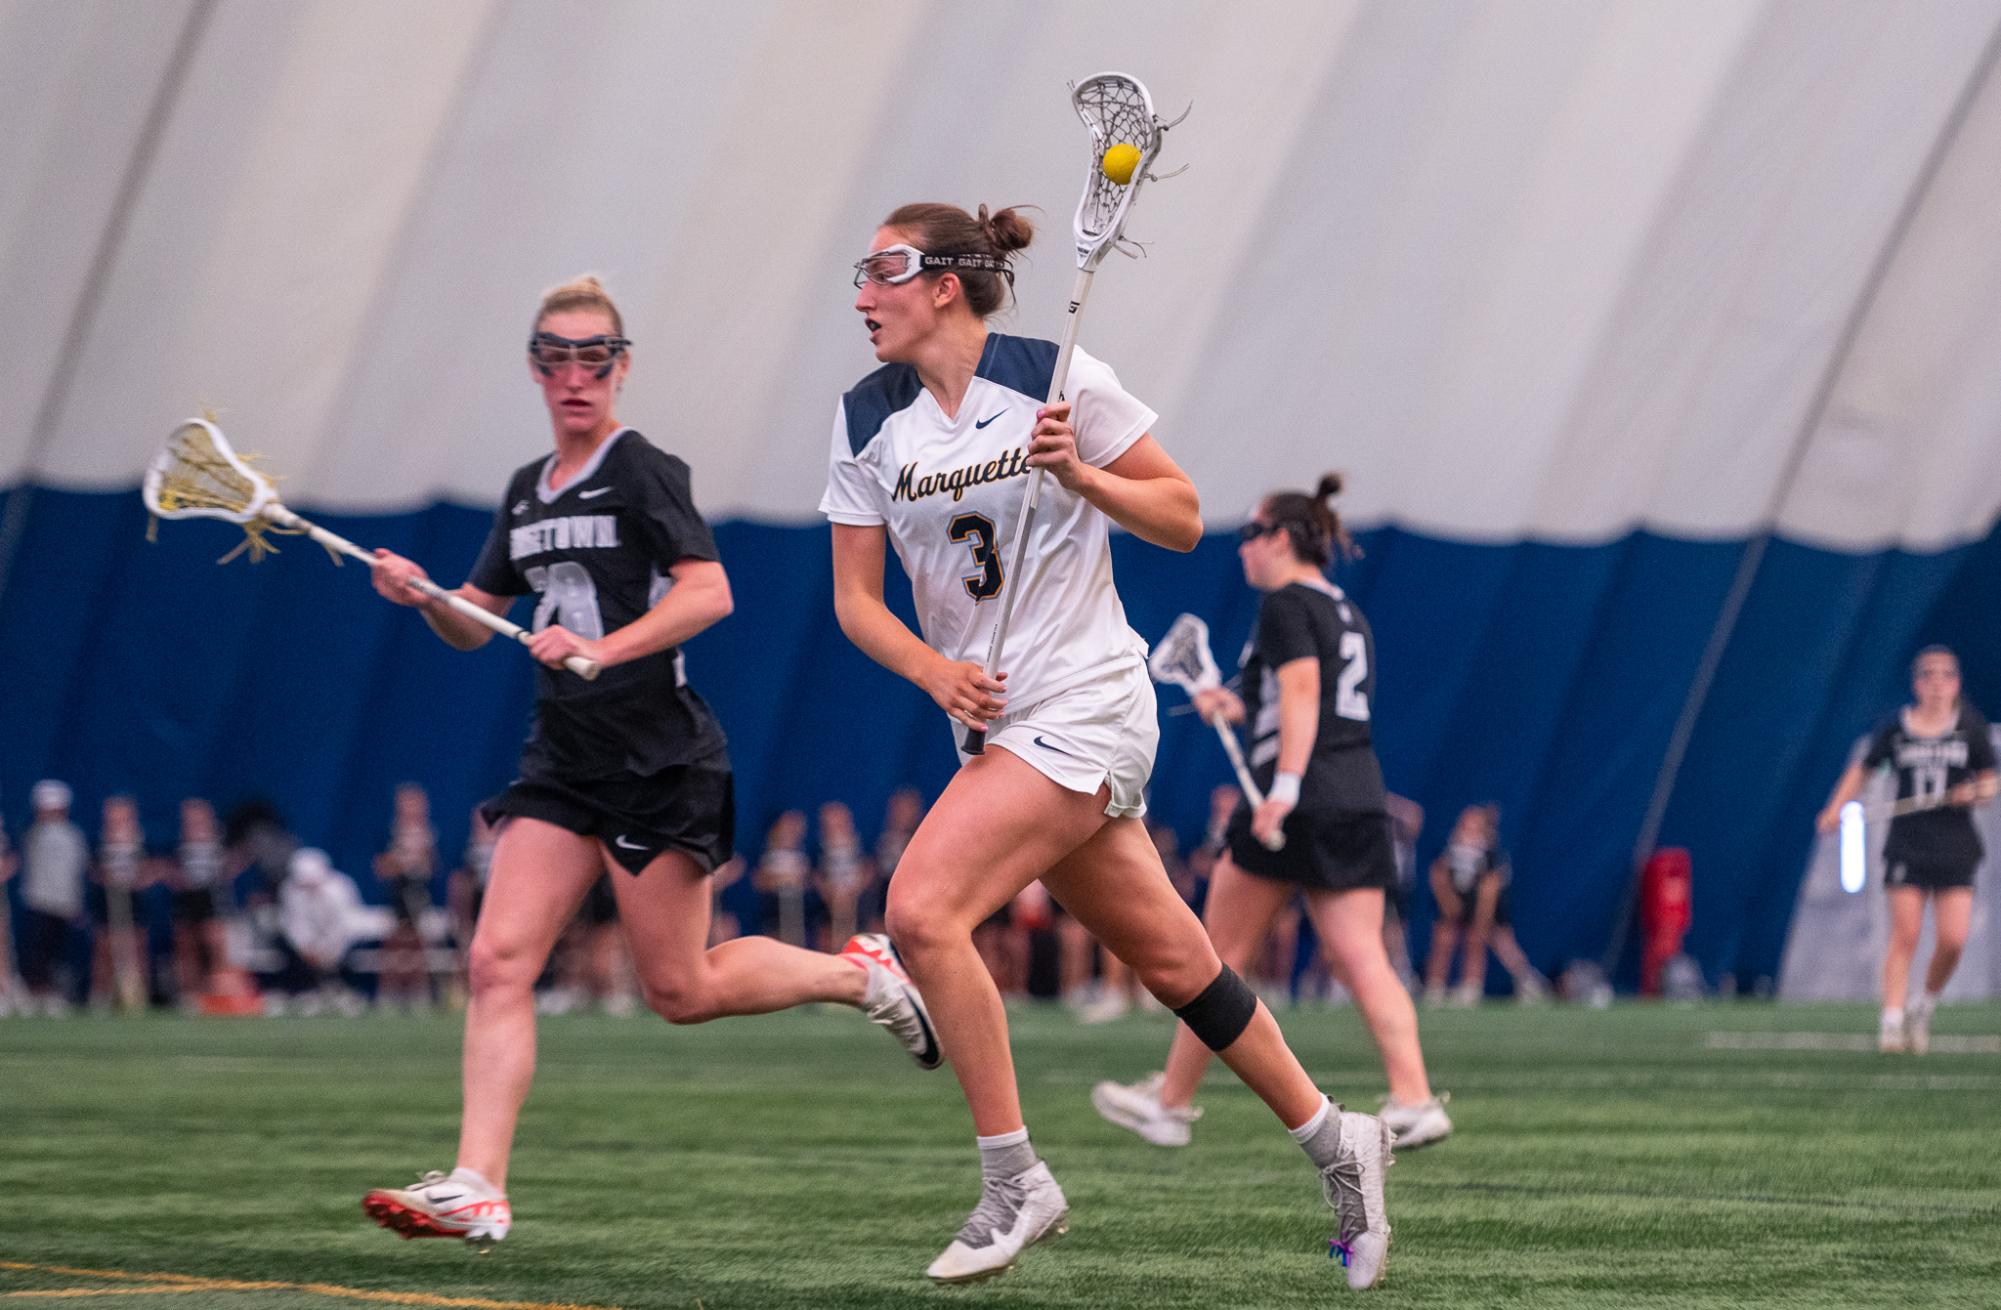 Marquette Women’s Lacrosse Dominates with 21-4 Win Over Xavier to Secure Big East Tournament Seed